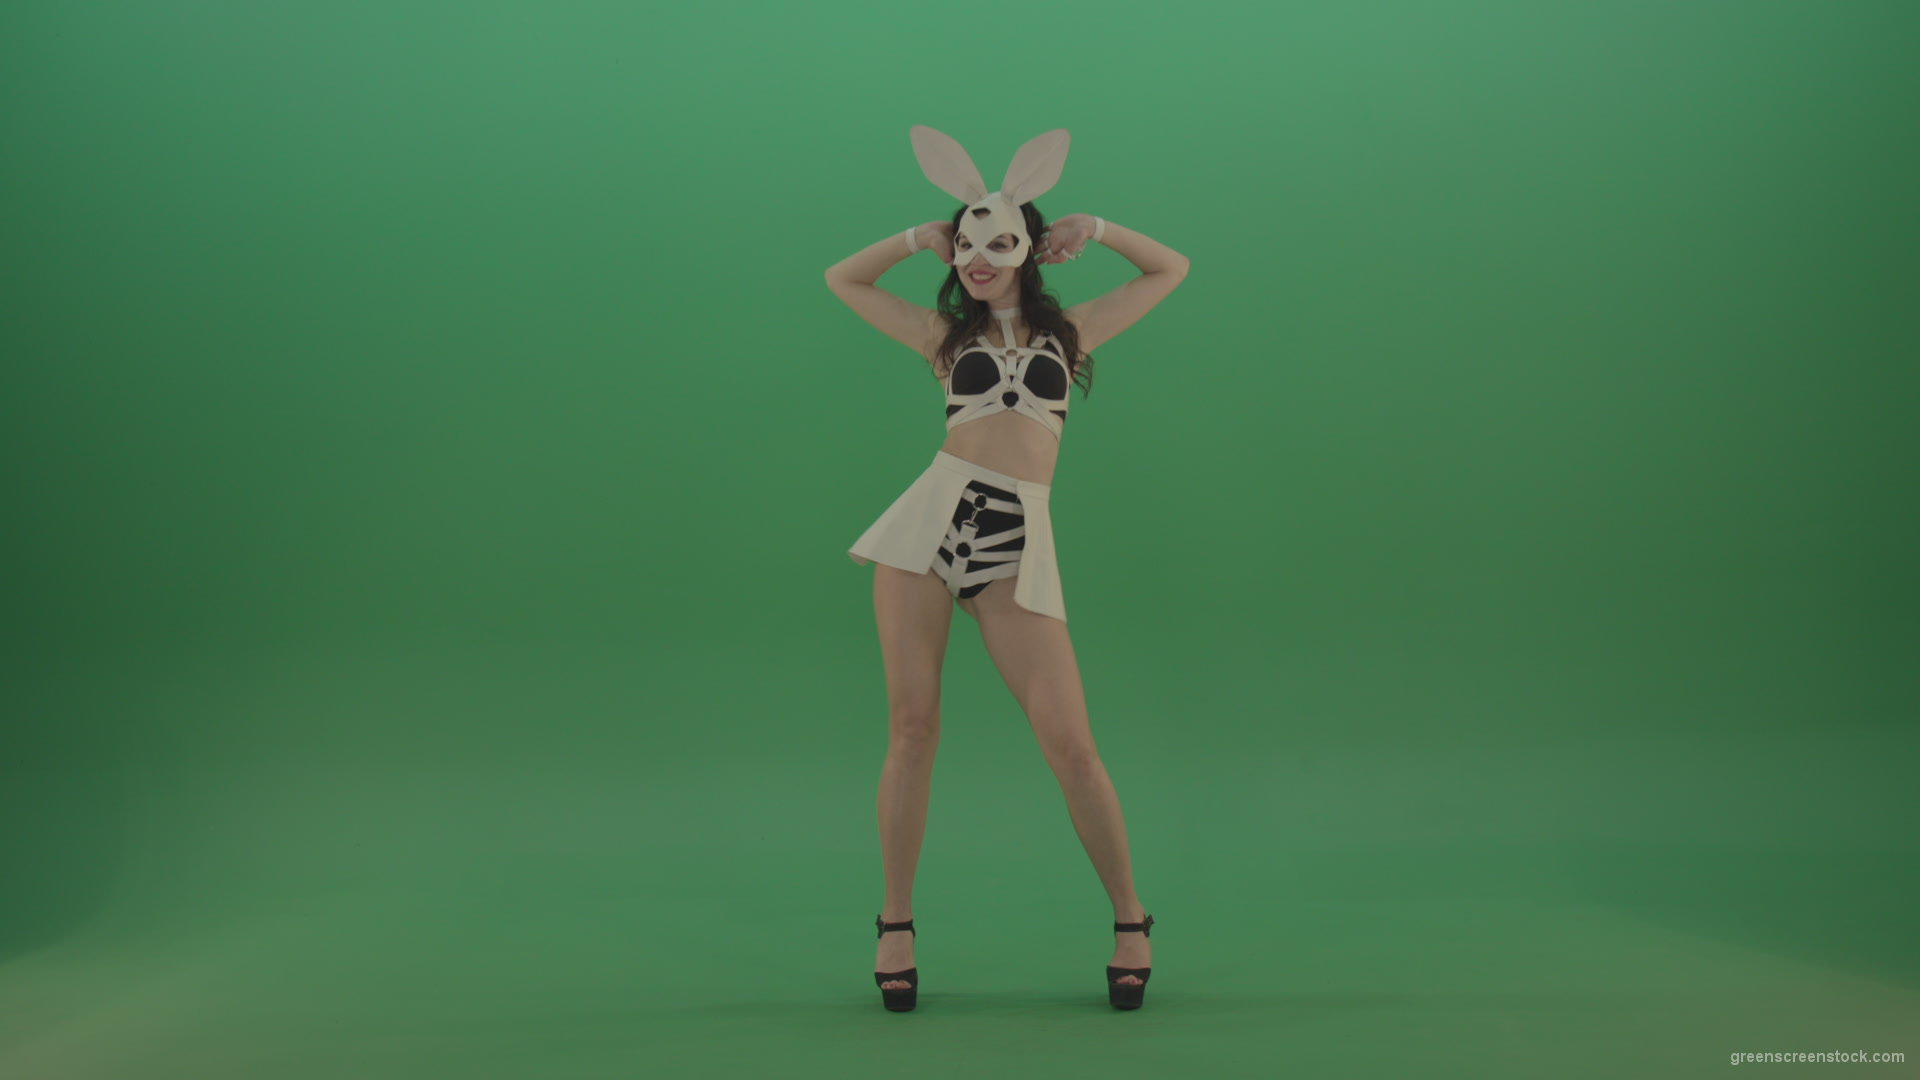 Black-white-sexy-costume-the-girl-moves-the-basin-in-different-directions-on-chromakey-background_006 Green Screen Stock